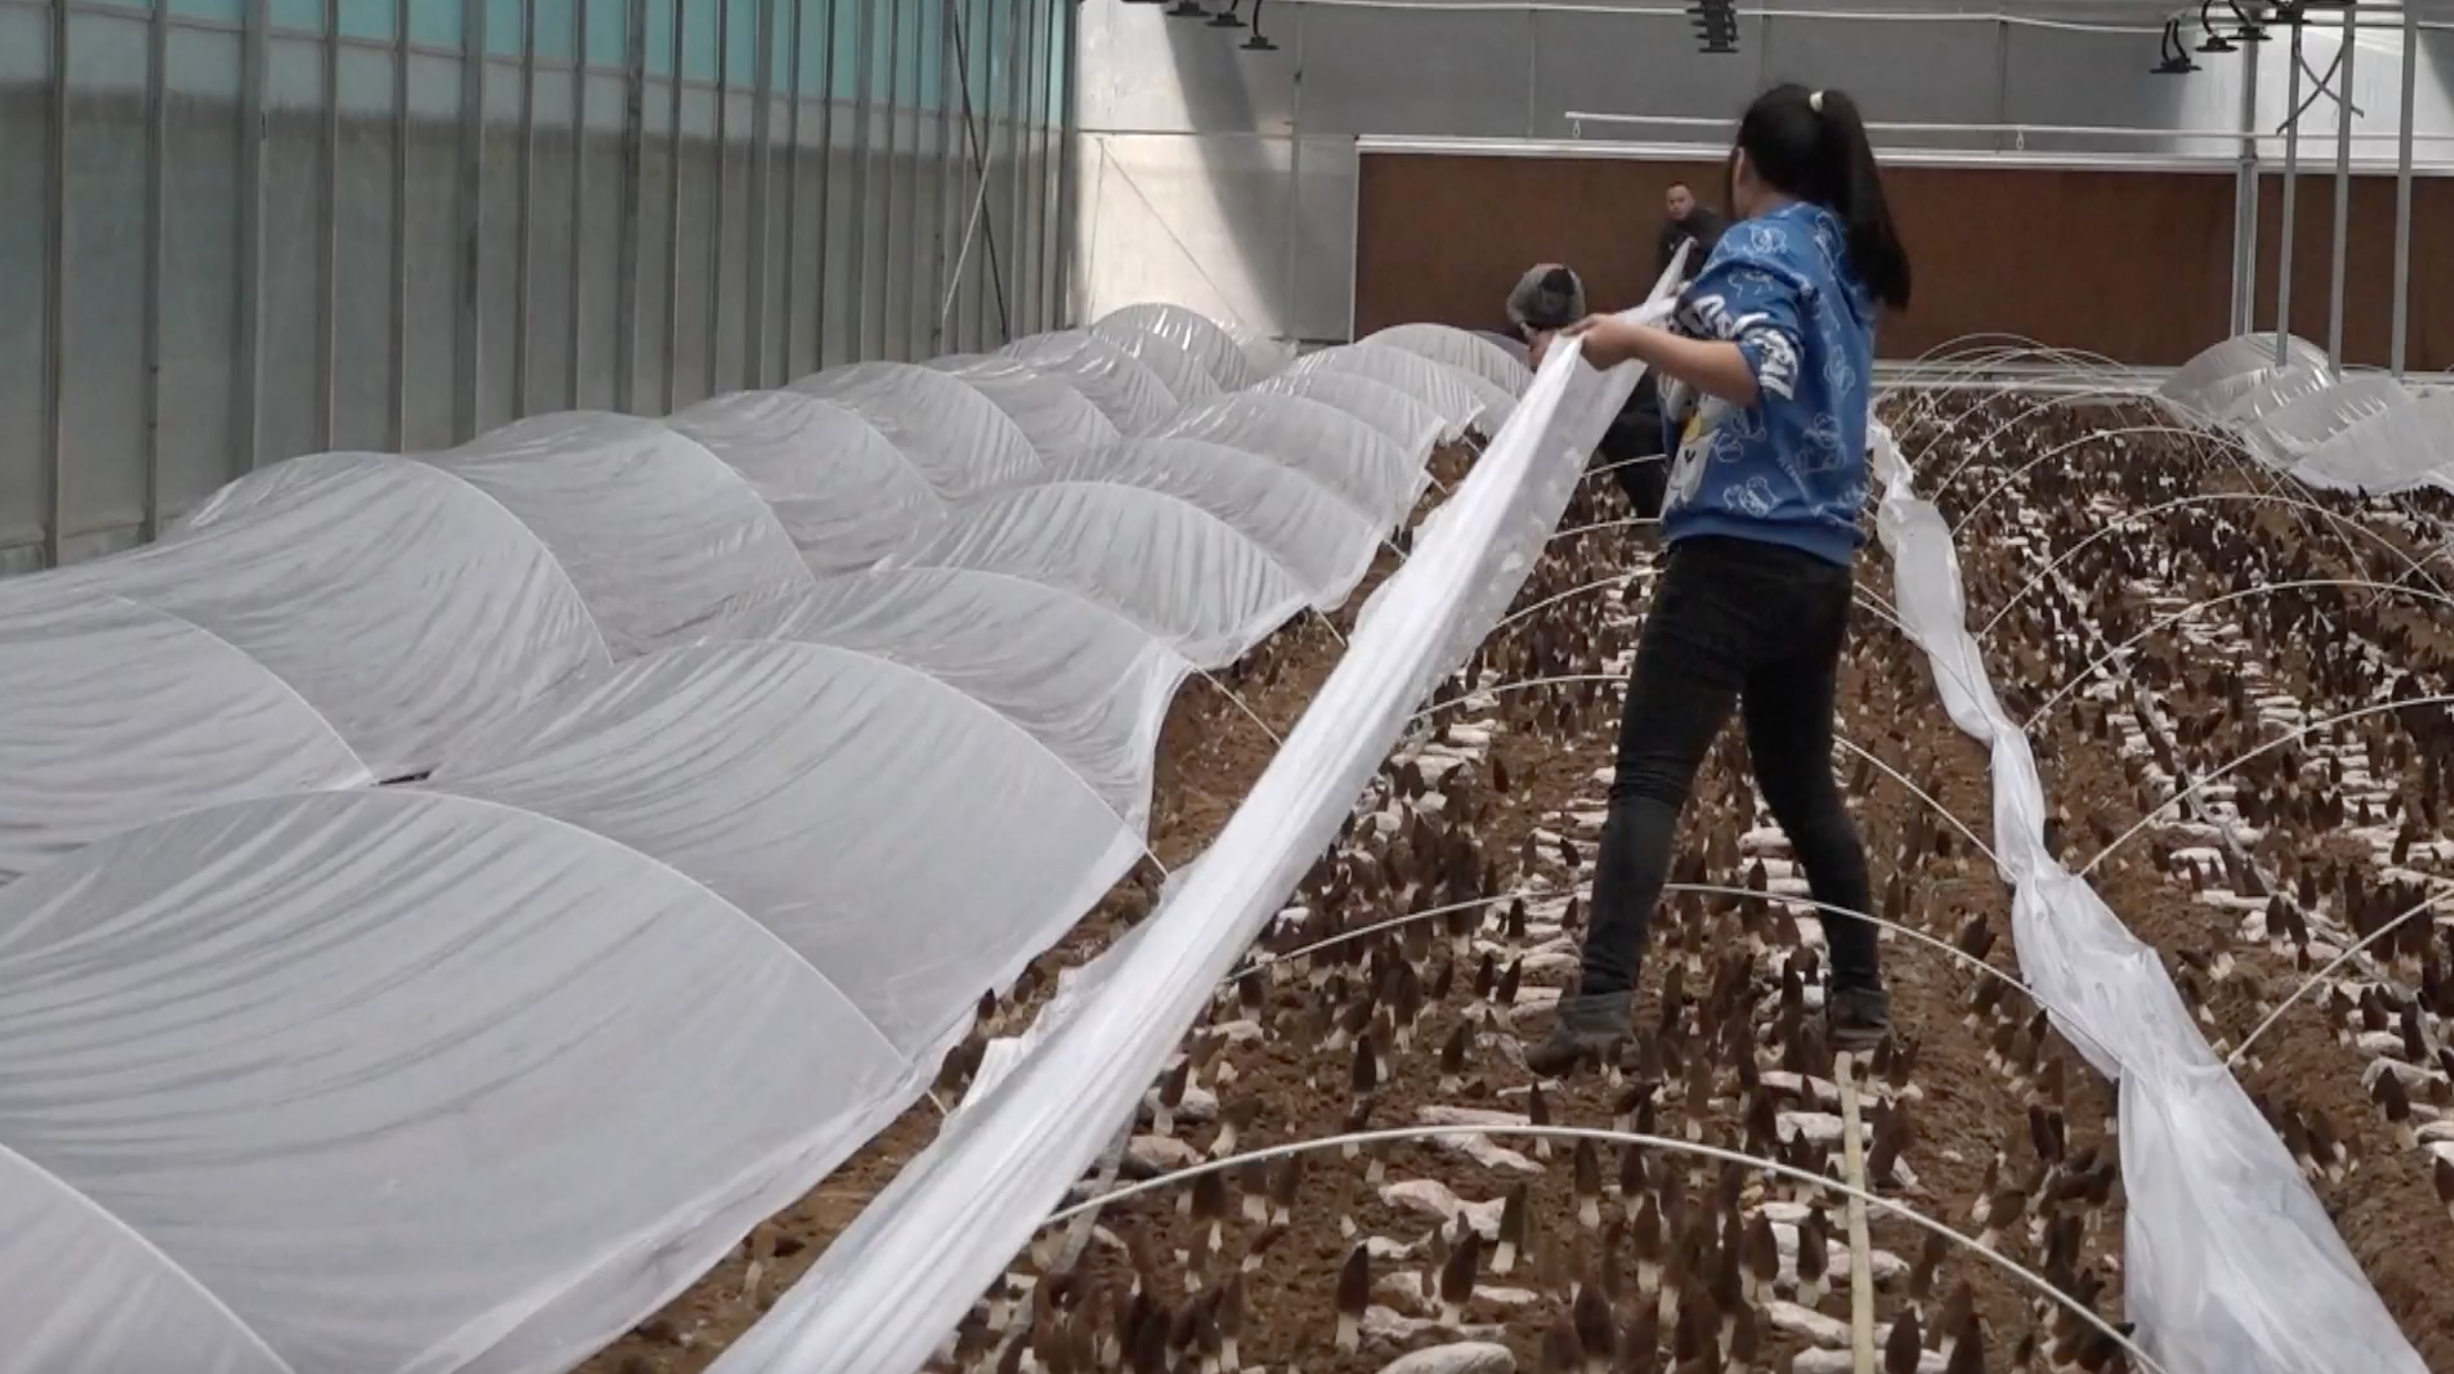 Farmers place plastic mulch layers above morel mushrooms in a greenhouse in Xiushan County, southwest China's Chongqing Municipality. /China Media Group